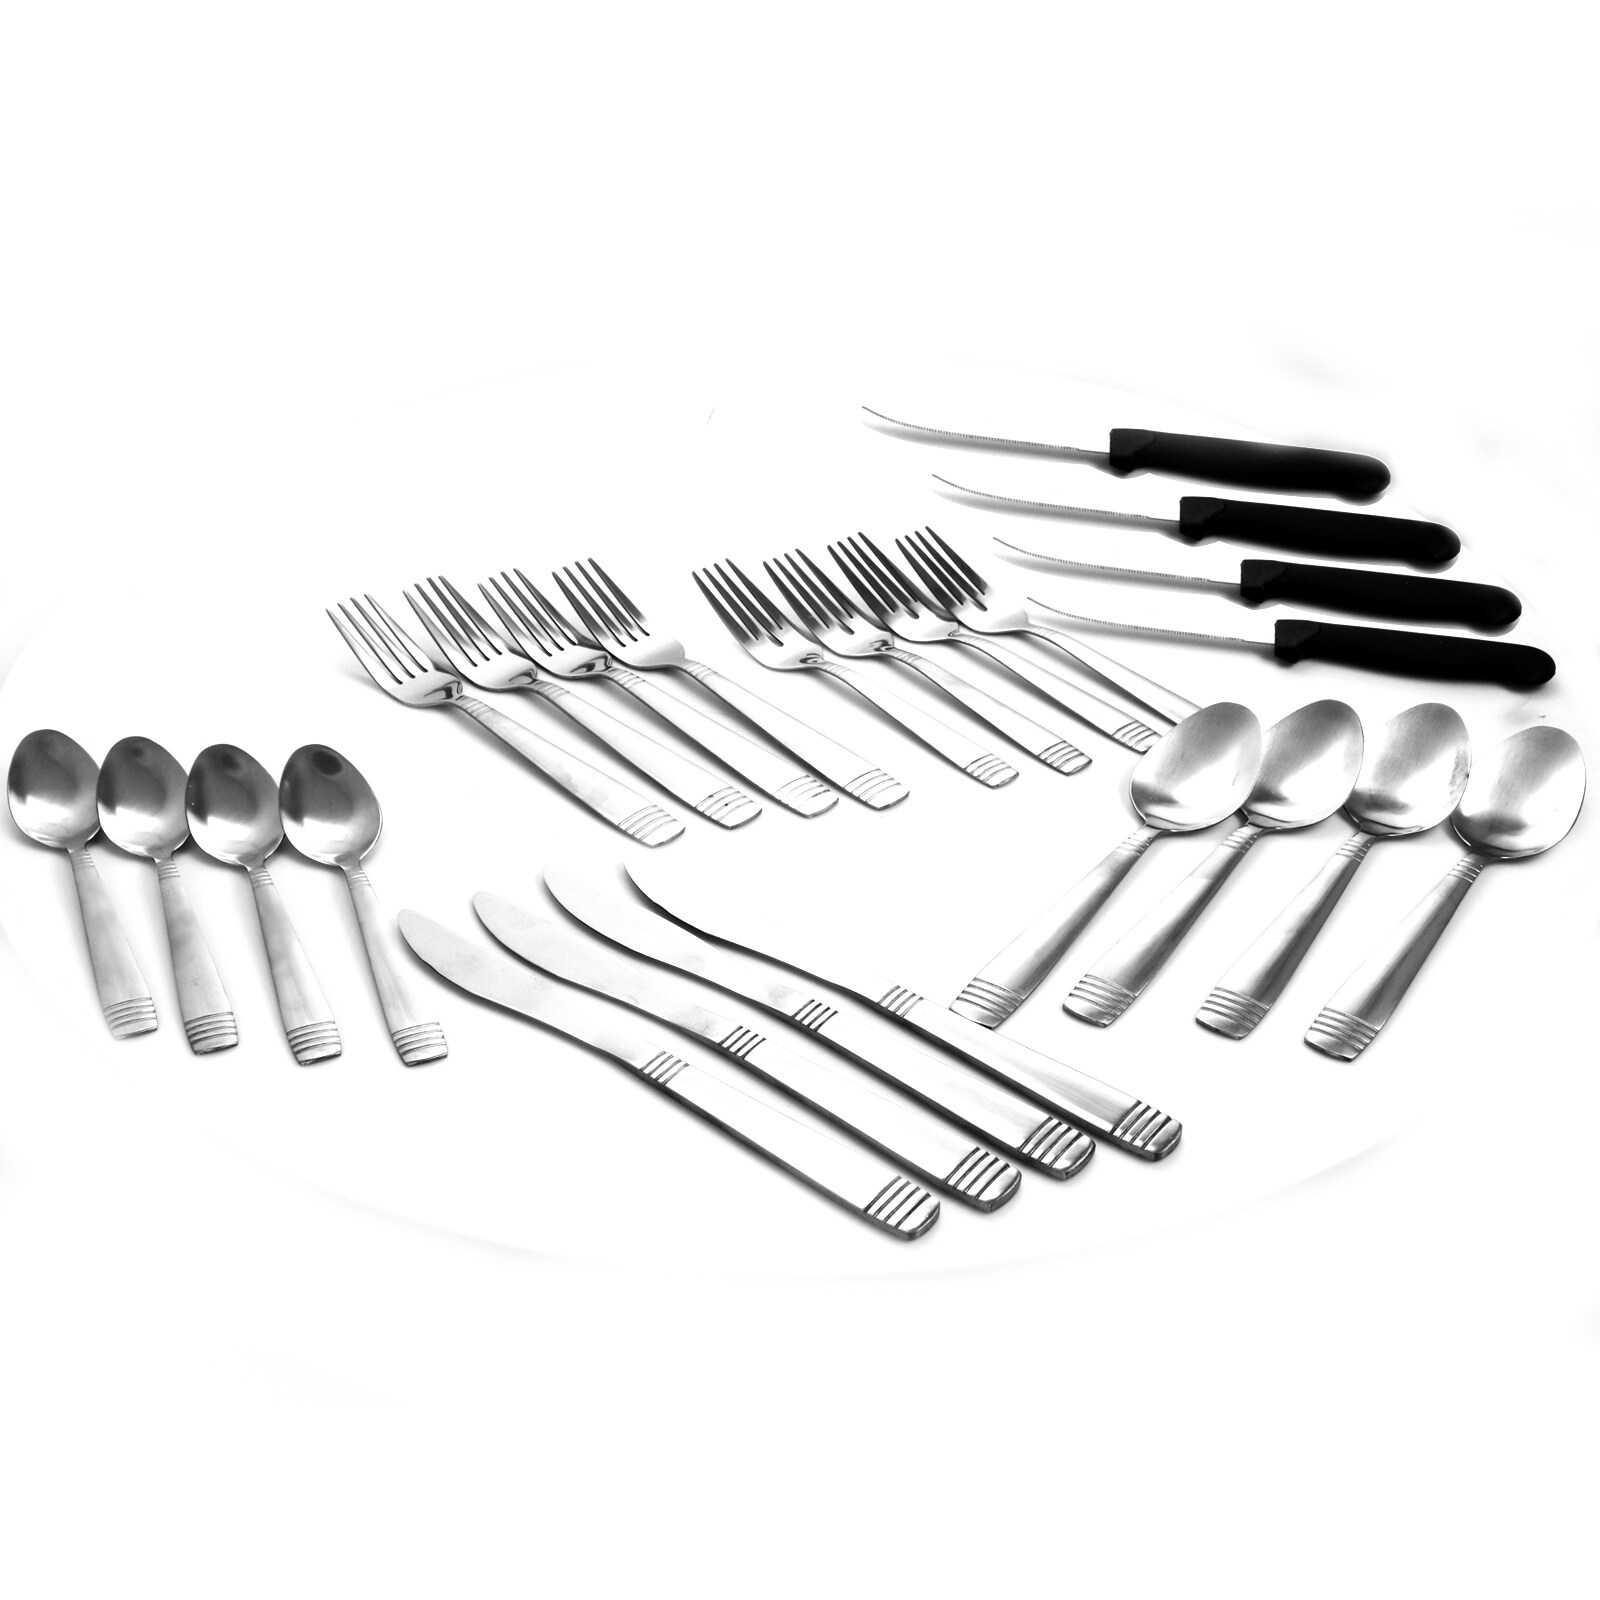 https://ak1.ostkcdn.com/images/products/is/images/direct/a62d4eb7a0ff31af791d0aca1e2646c3f6b48a0c/Gibson-Palmore-Plus-24-Piece-Stainless-Steel-Flatware-Set-with-4-Steak-Knives.jpg